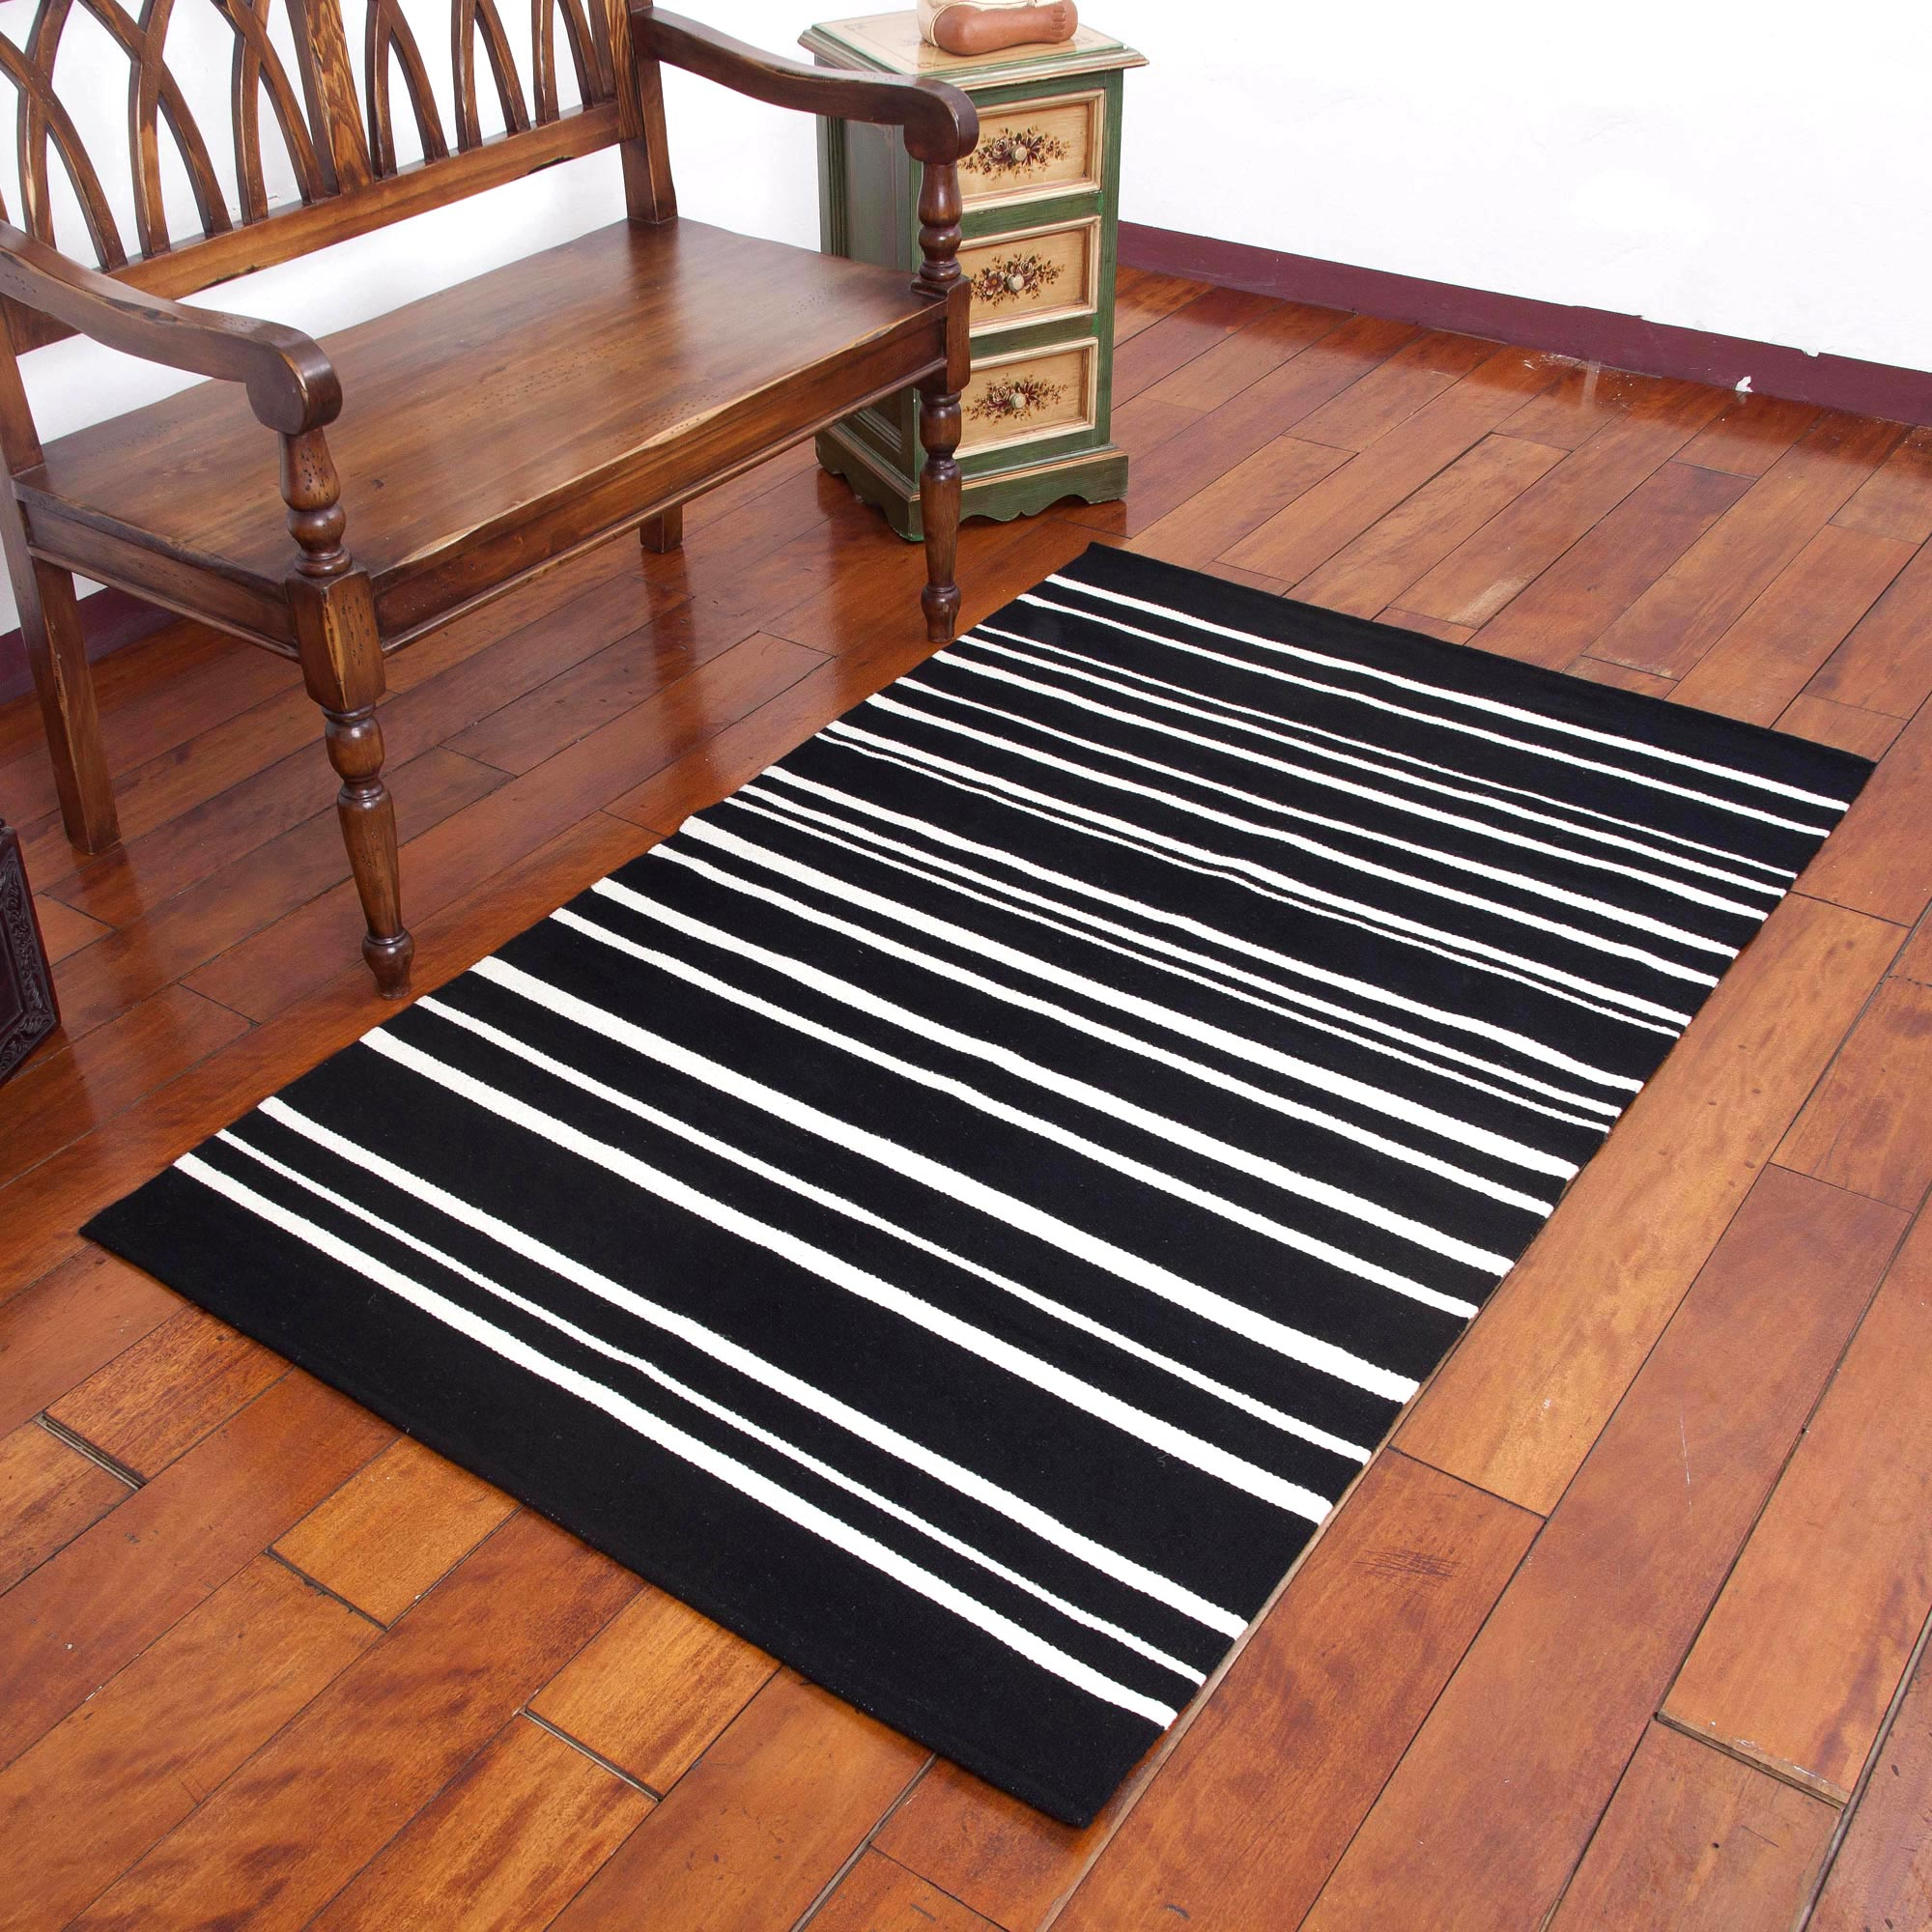 Featured image of post Black And White Striped Wool Rug - Handwoven using a variety of braided.